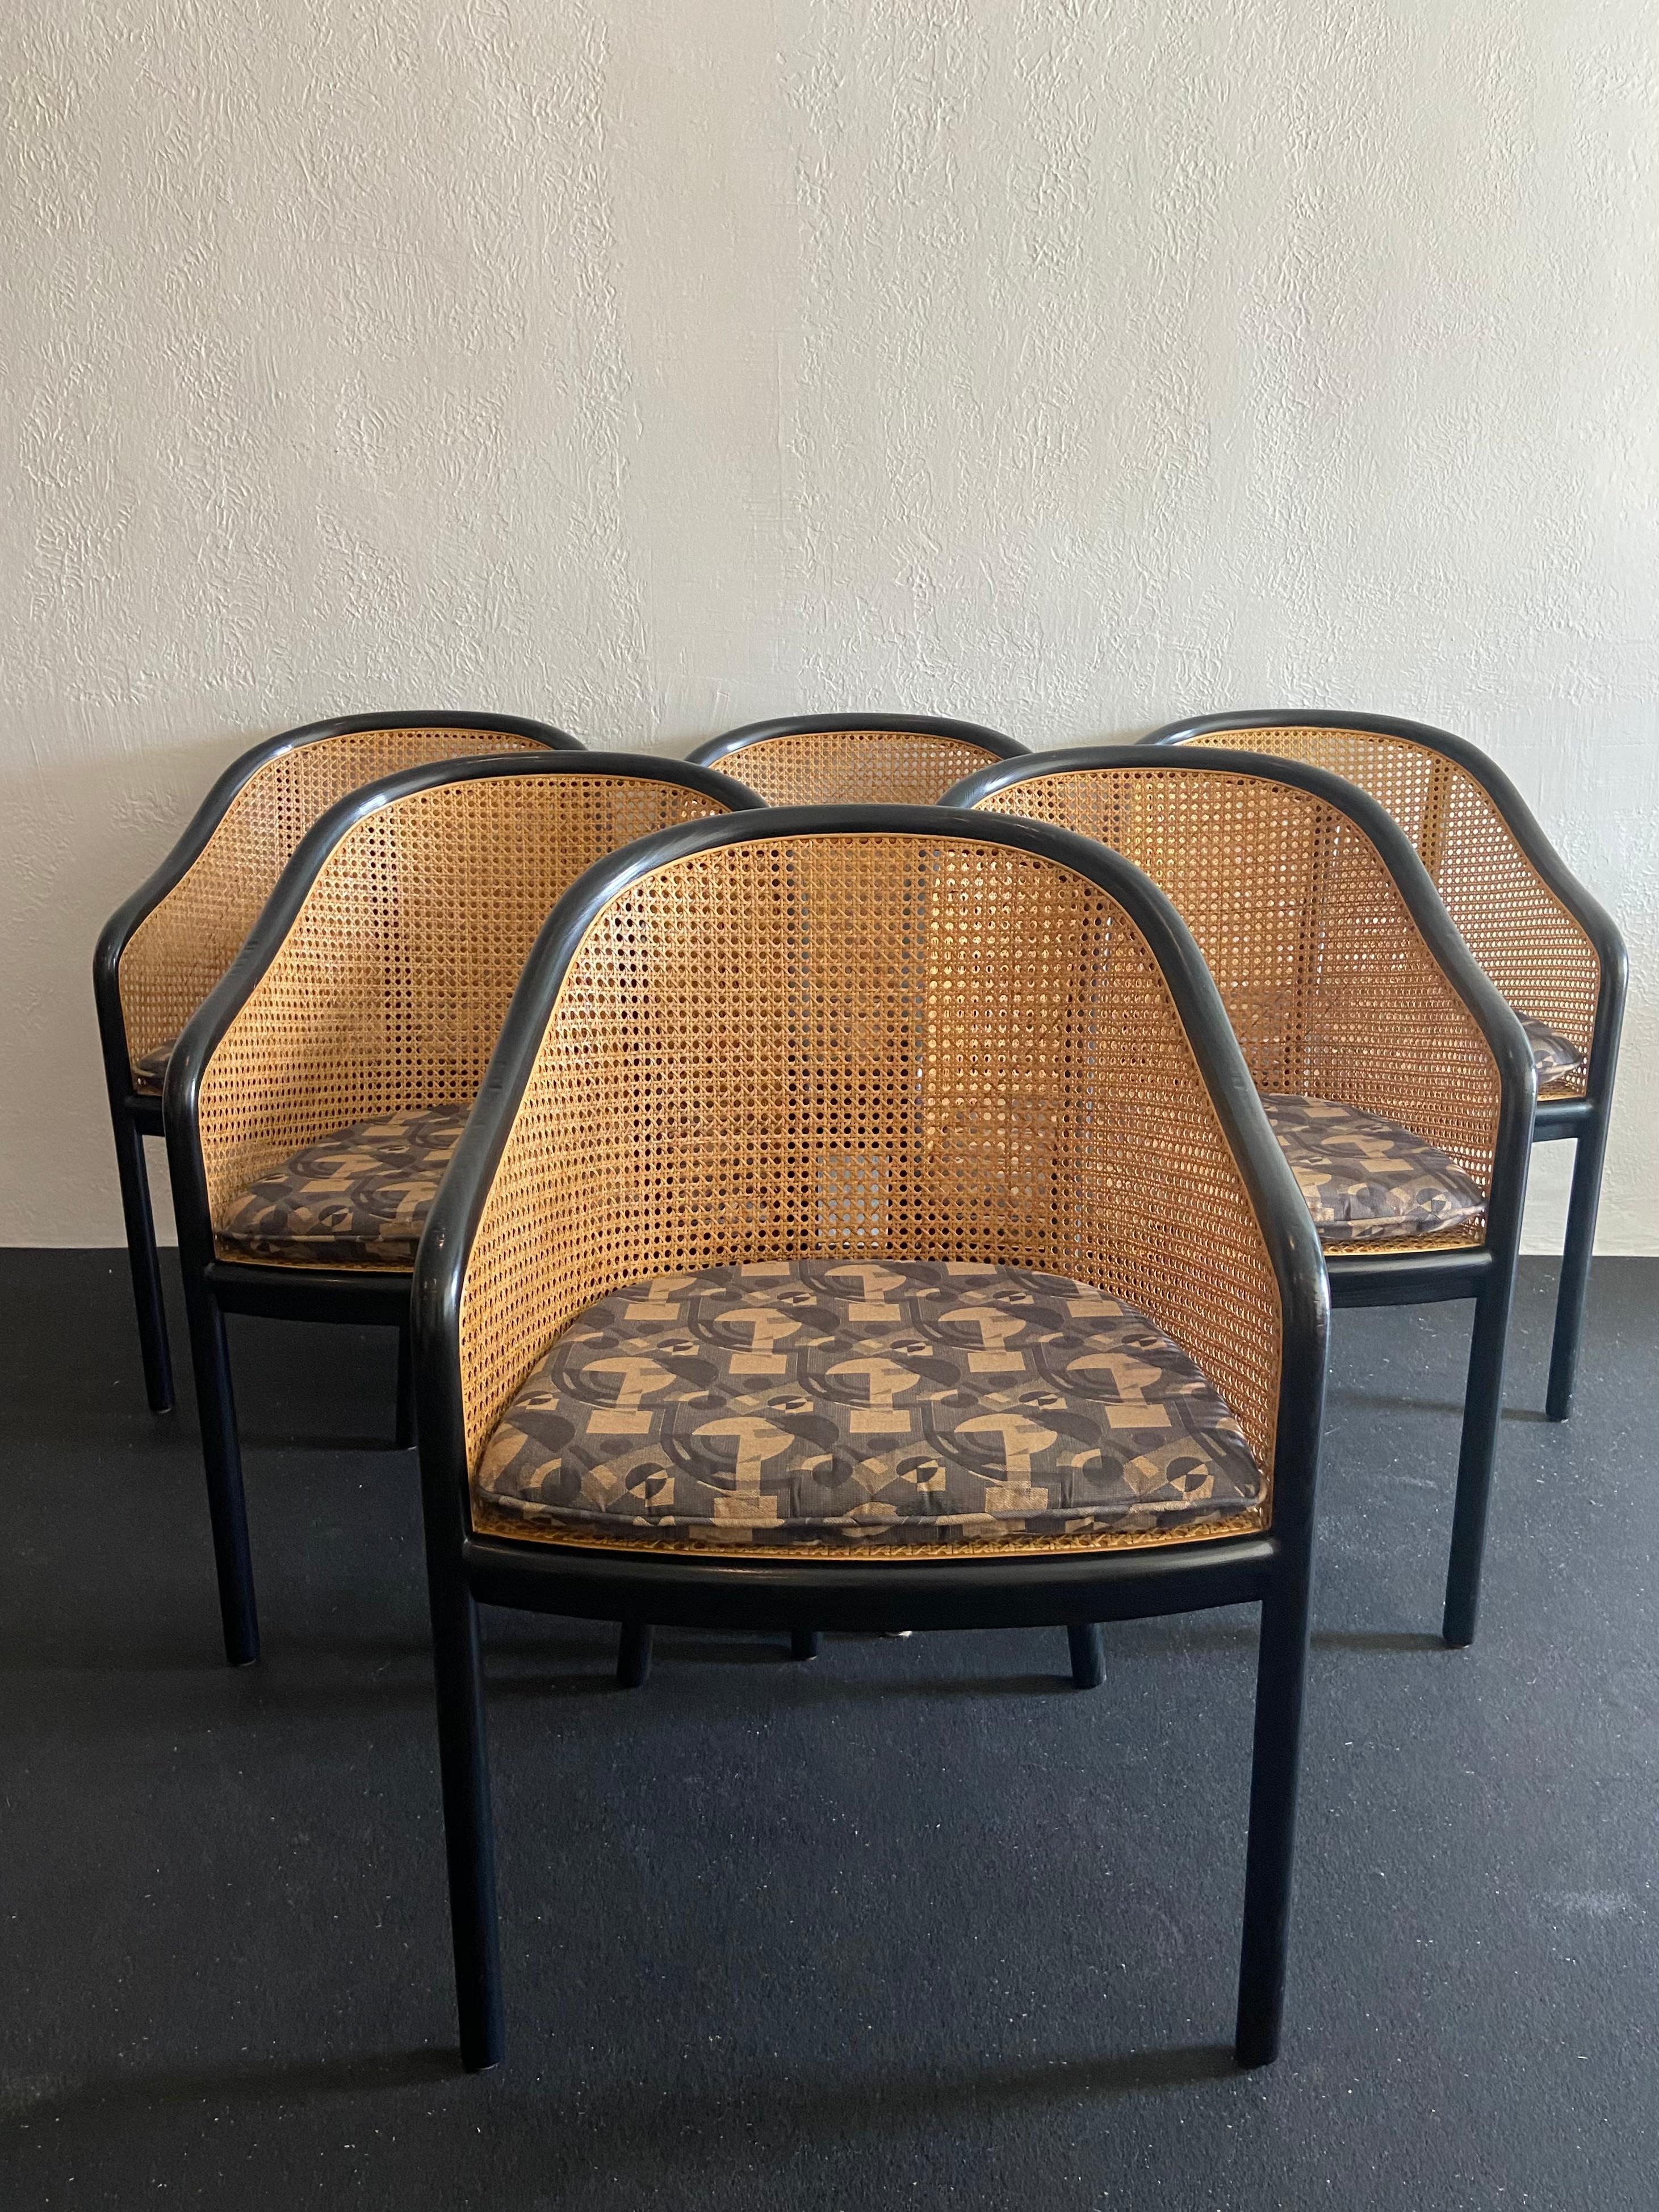 Set of 6 ebonized bentwood and cane chairs by Ward Bennett for Brickel Associates. Found in original finish and custom commissioned Lee Jofa fabric. The arms have been touched up to cover wear from previous use with dining table, slight breakage to